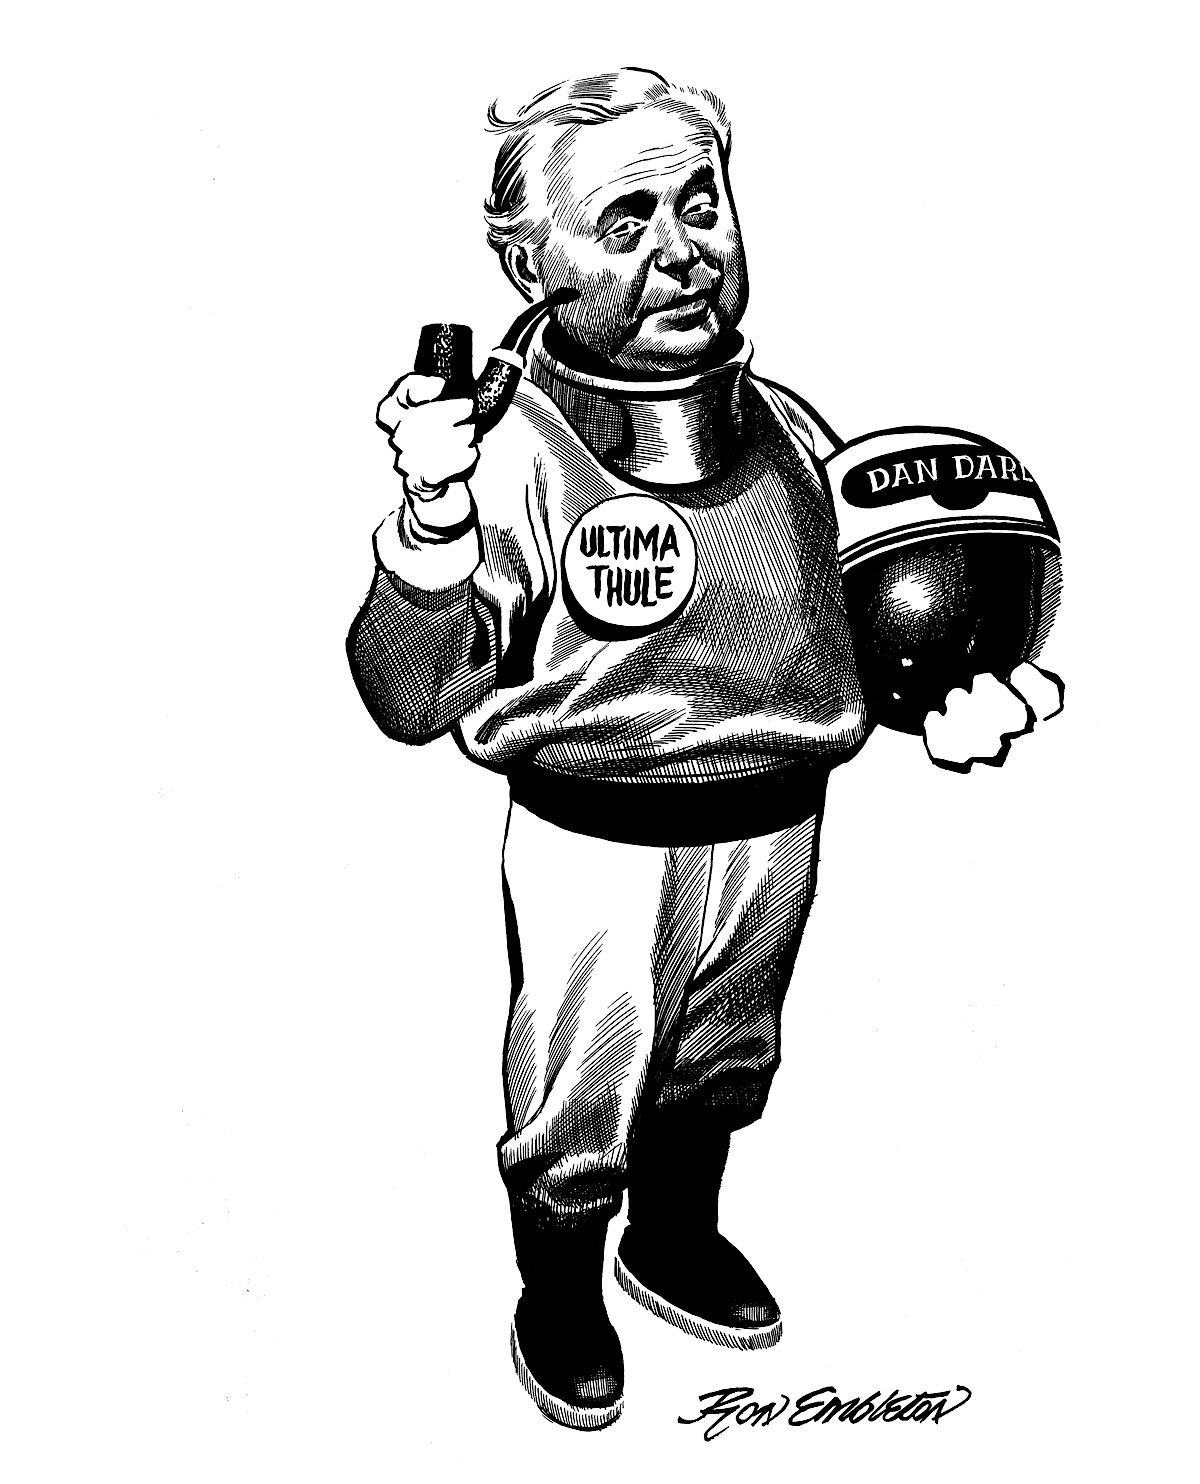 The cover of the 1969 zine Ultima Thule by Ron Embleton, portraying then Prime Minister Harold Wilson as an astronaut